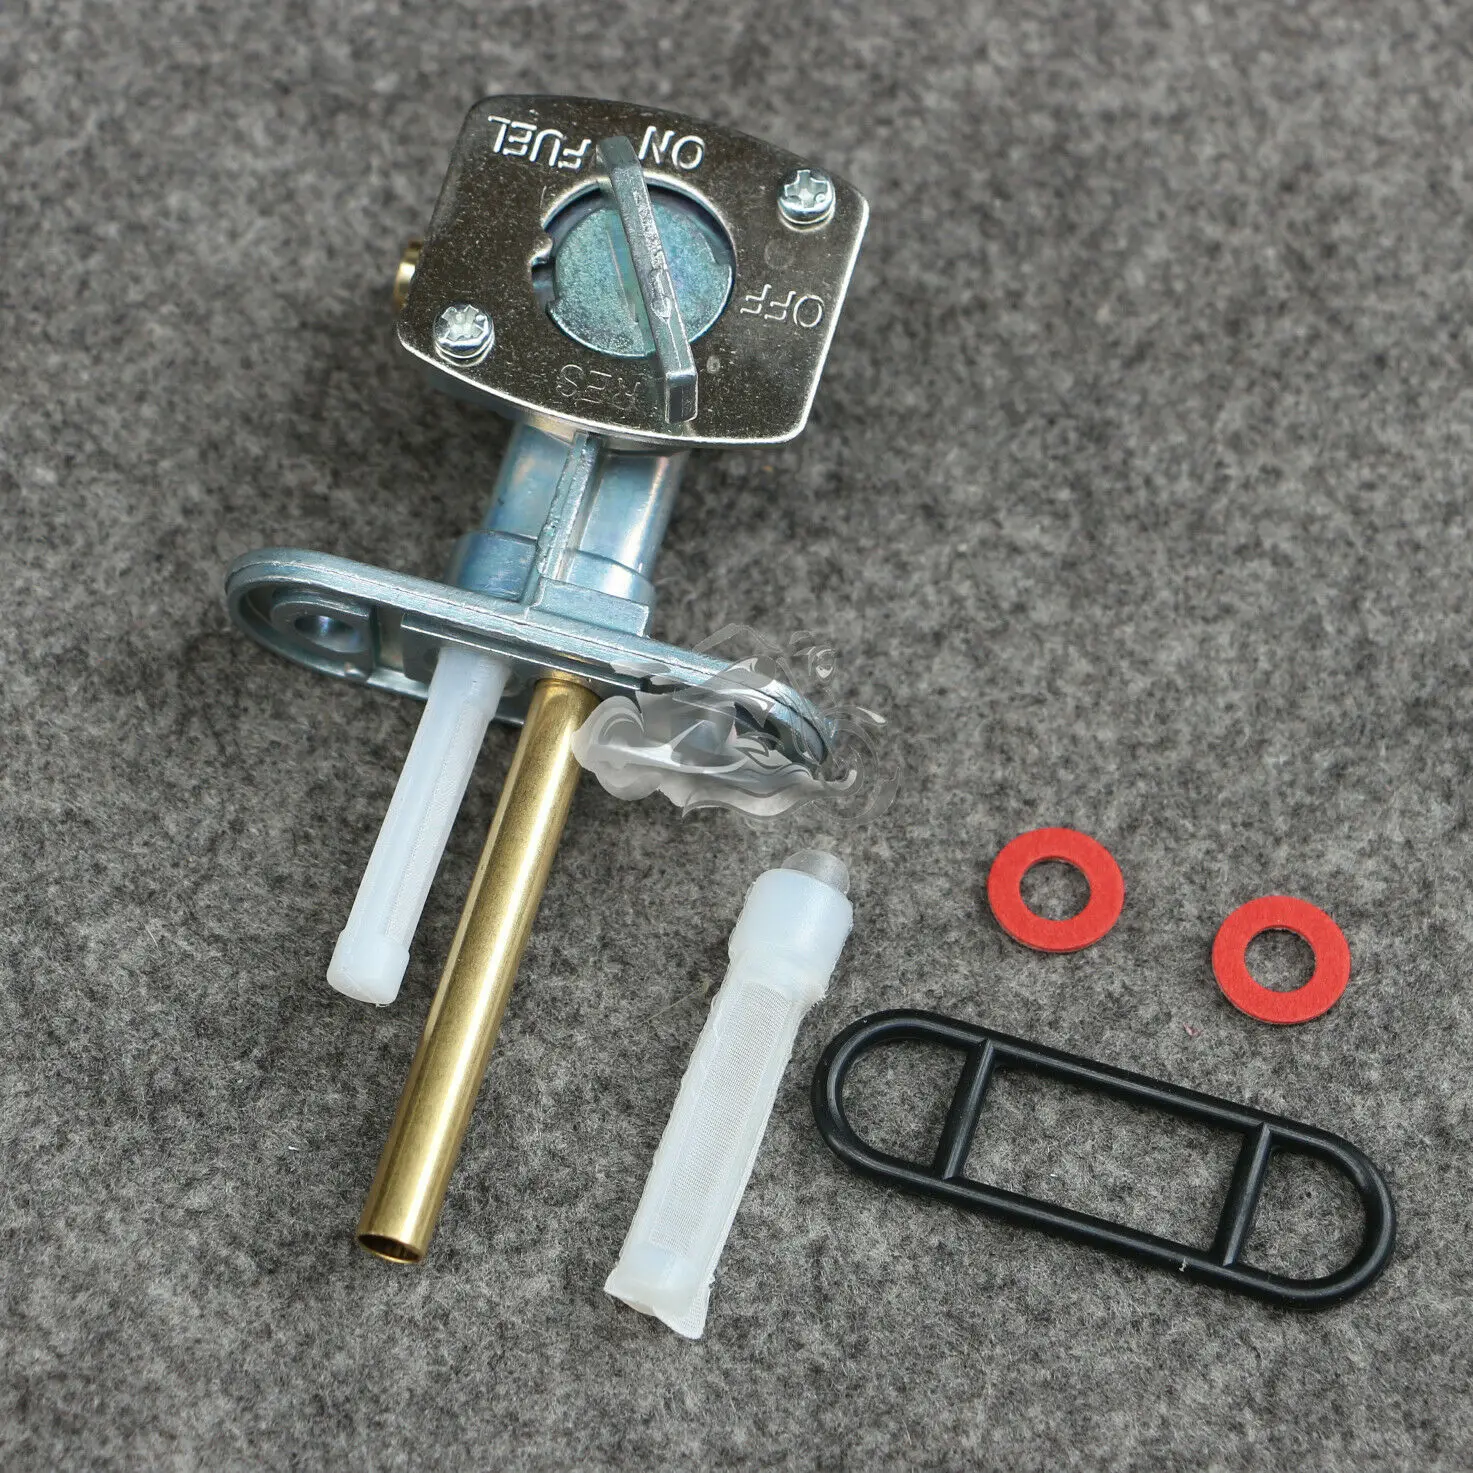 

Gas Tank Fuel Petcock Switch Valve Fit For Yamaha WR250 F WR400 F WR426 WR450 XT225 XT350 XT600 YZ250 YZ400 YZ426 YZ450 YZ80 85